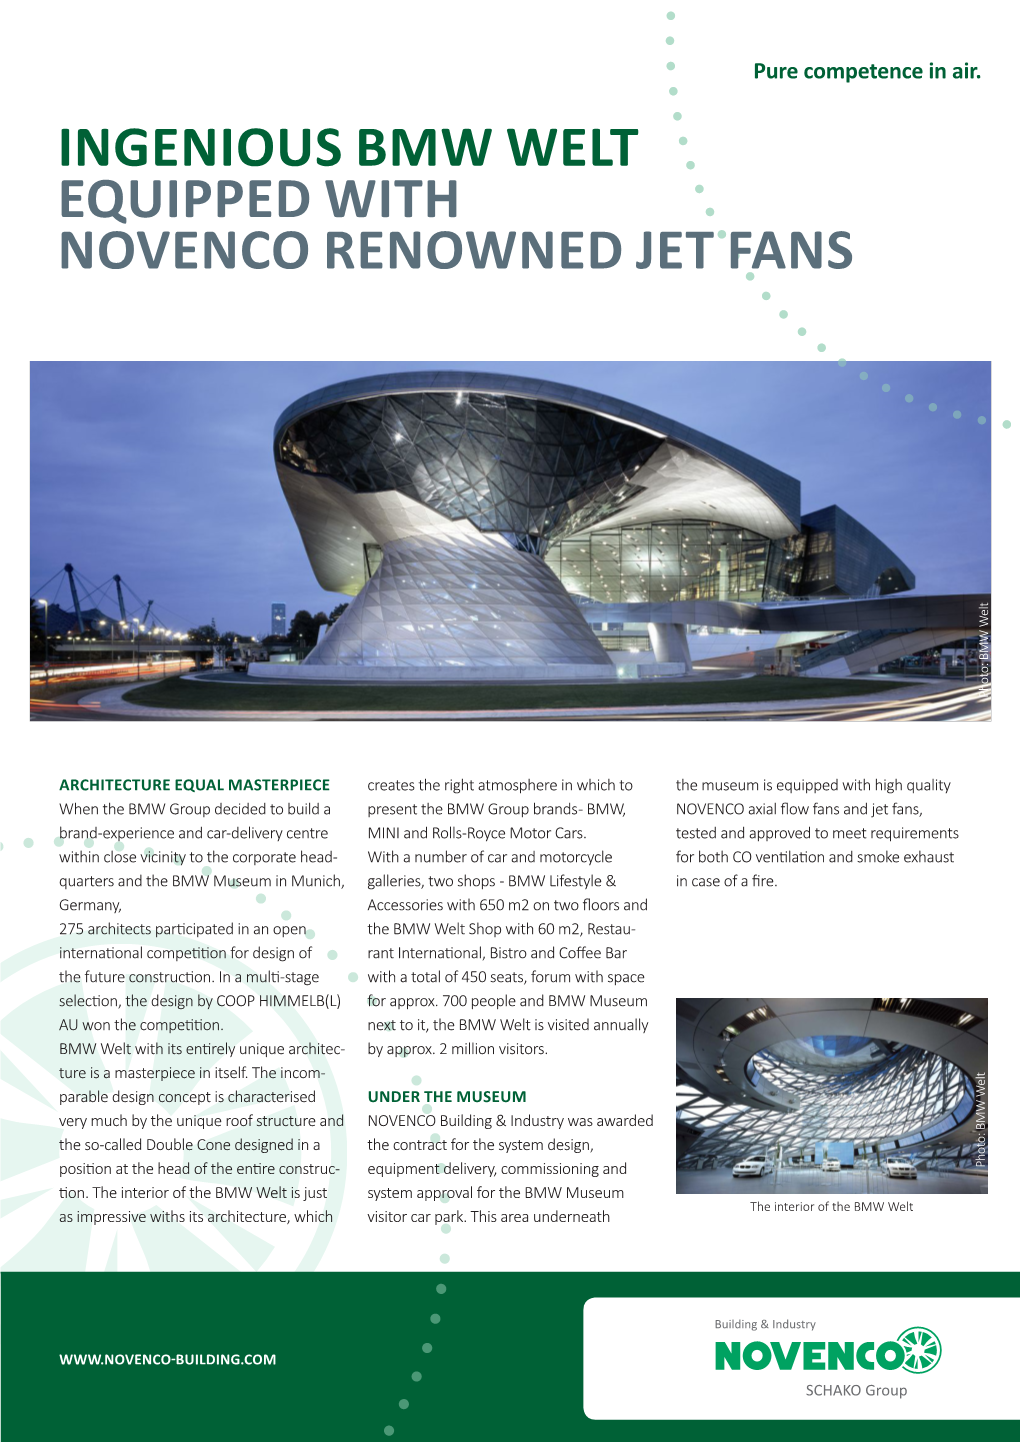 INGENIOUS BMW WELT EQUIPPED with NOVENCO RENOWNED JET FANS Photo: BMW Welt Photo